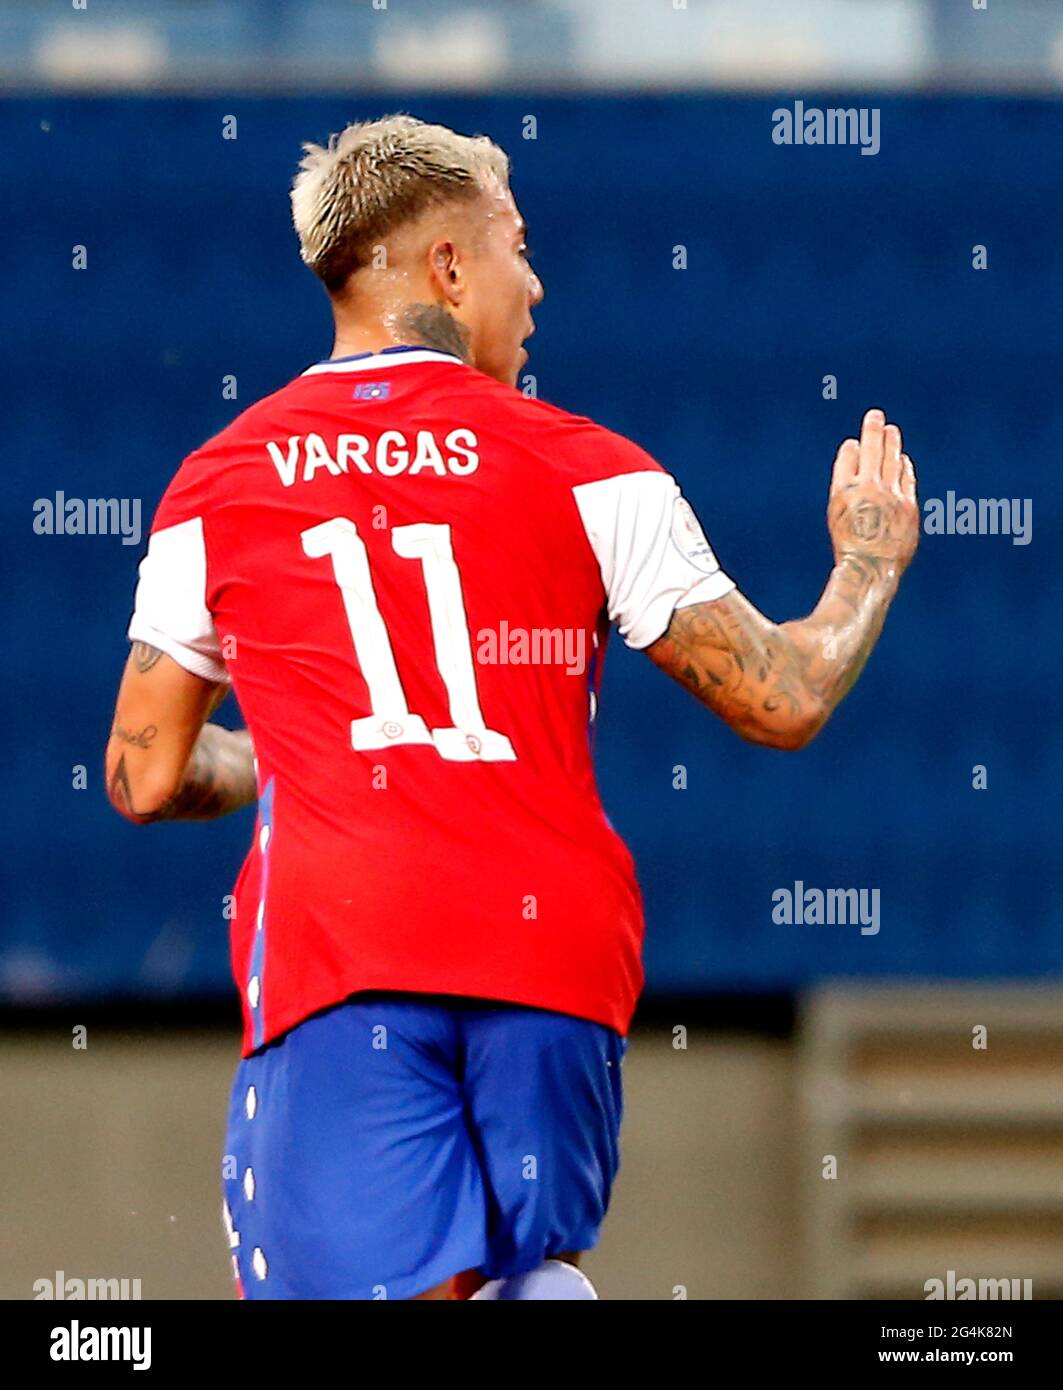 CUIABA, BRAZIL - JUNE 21: Eduardo Vargas of Chile celebrates after scores his gol ,during the match between Uruguay and Chile as part of Conmebol Copa America Brazil 2021 at Arena Pantanal on June 21, 2021 in Cuiaba, Brazil. (MB Media) Stock Photo